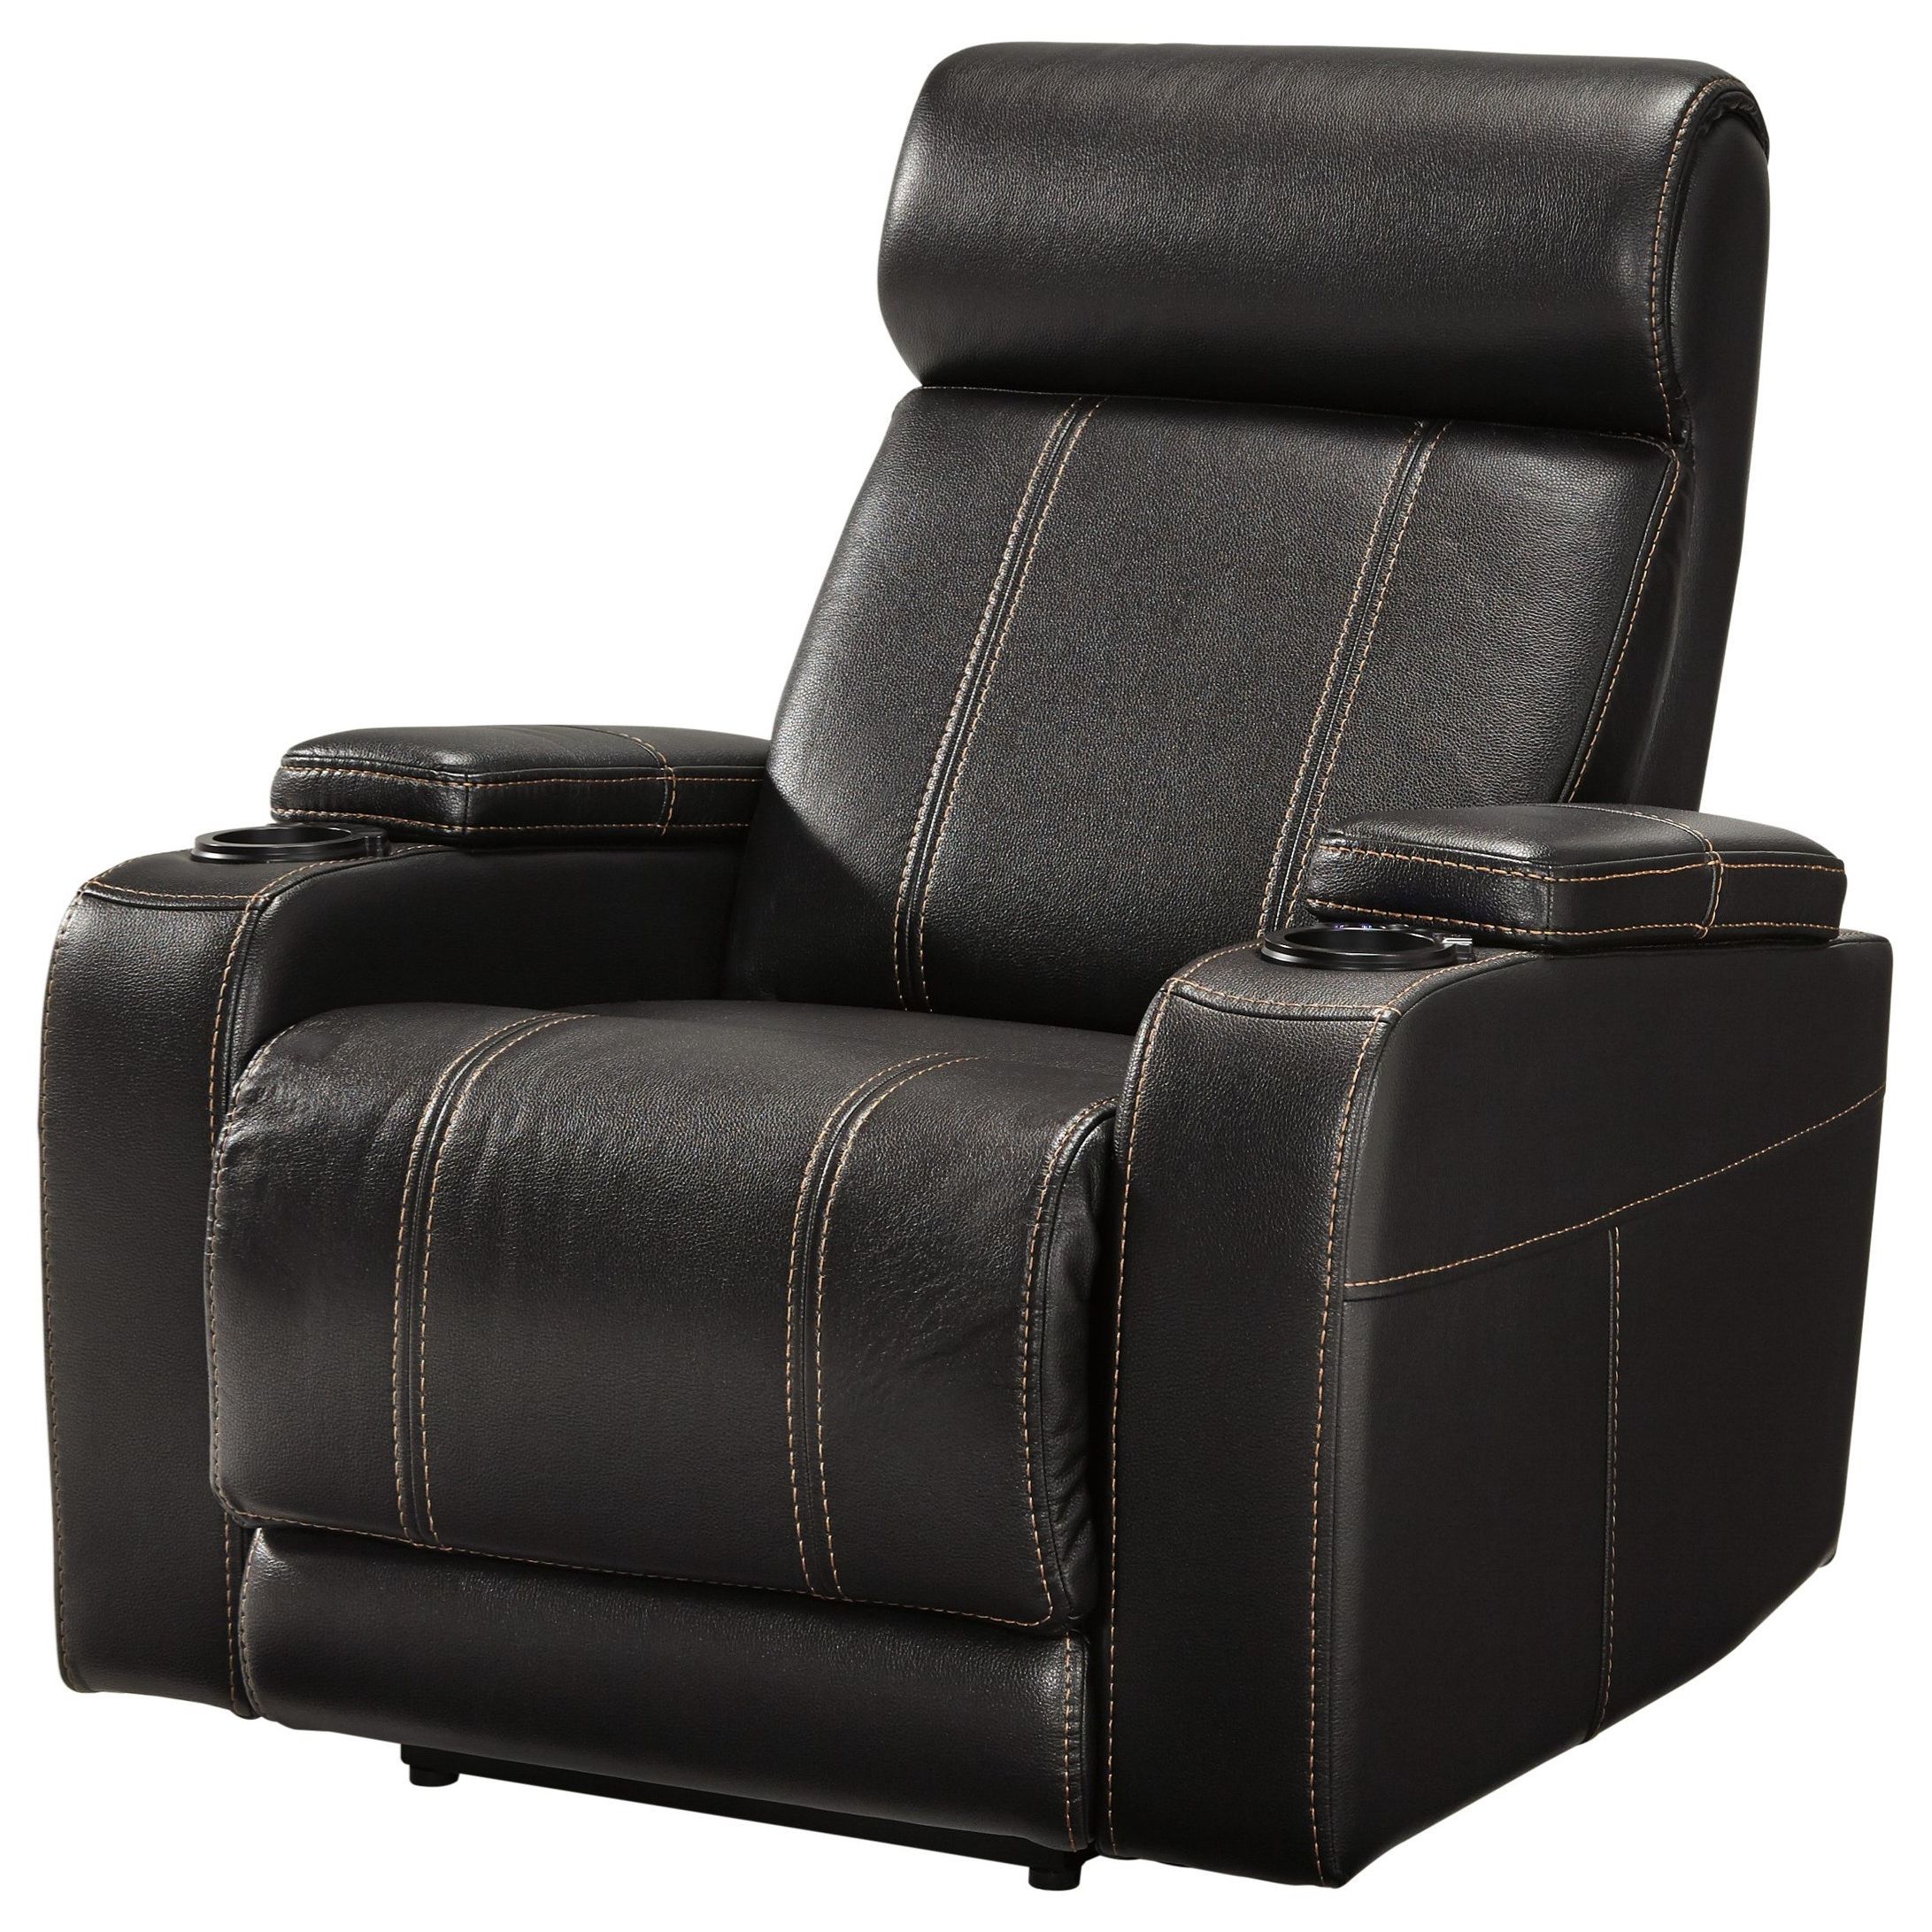 Signature Designashley Boyband Faux Leather Power Recliner With Cup Inside Well Known Black Faux Leather Usb Charging Ottomans (View 8 of 10)